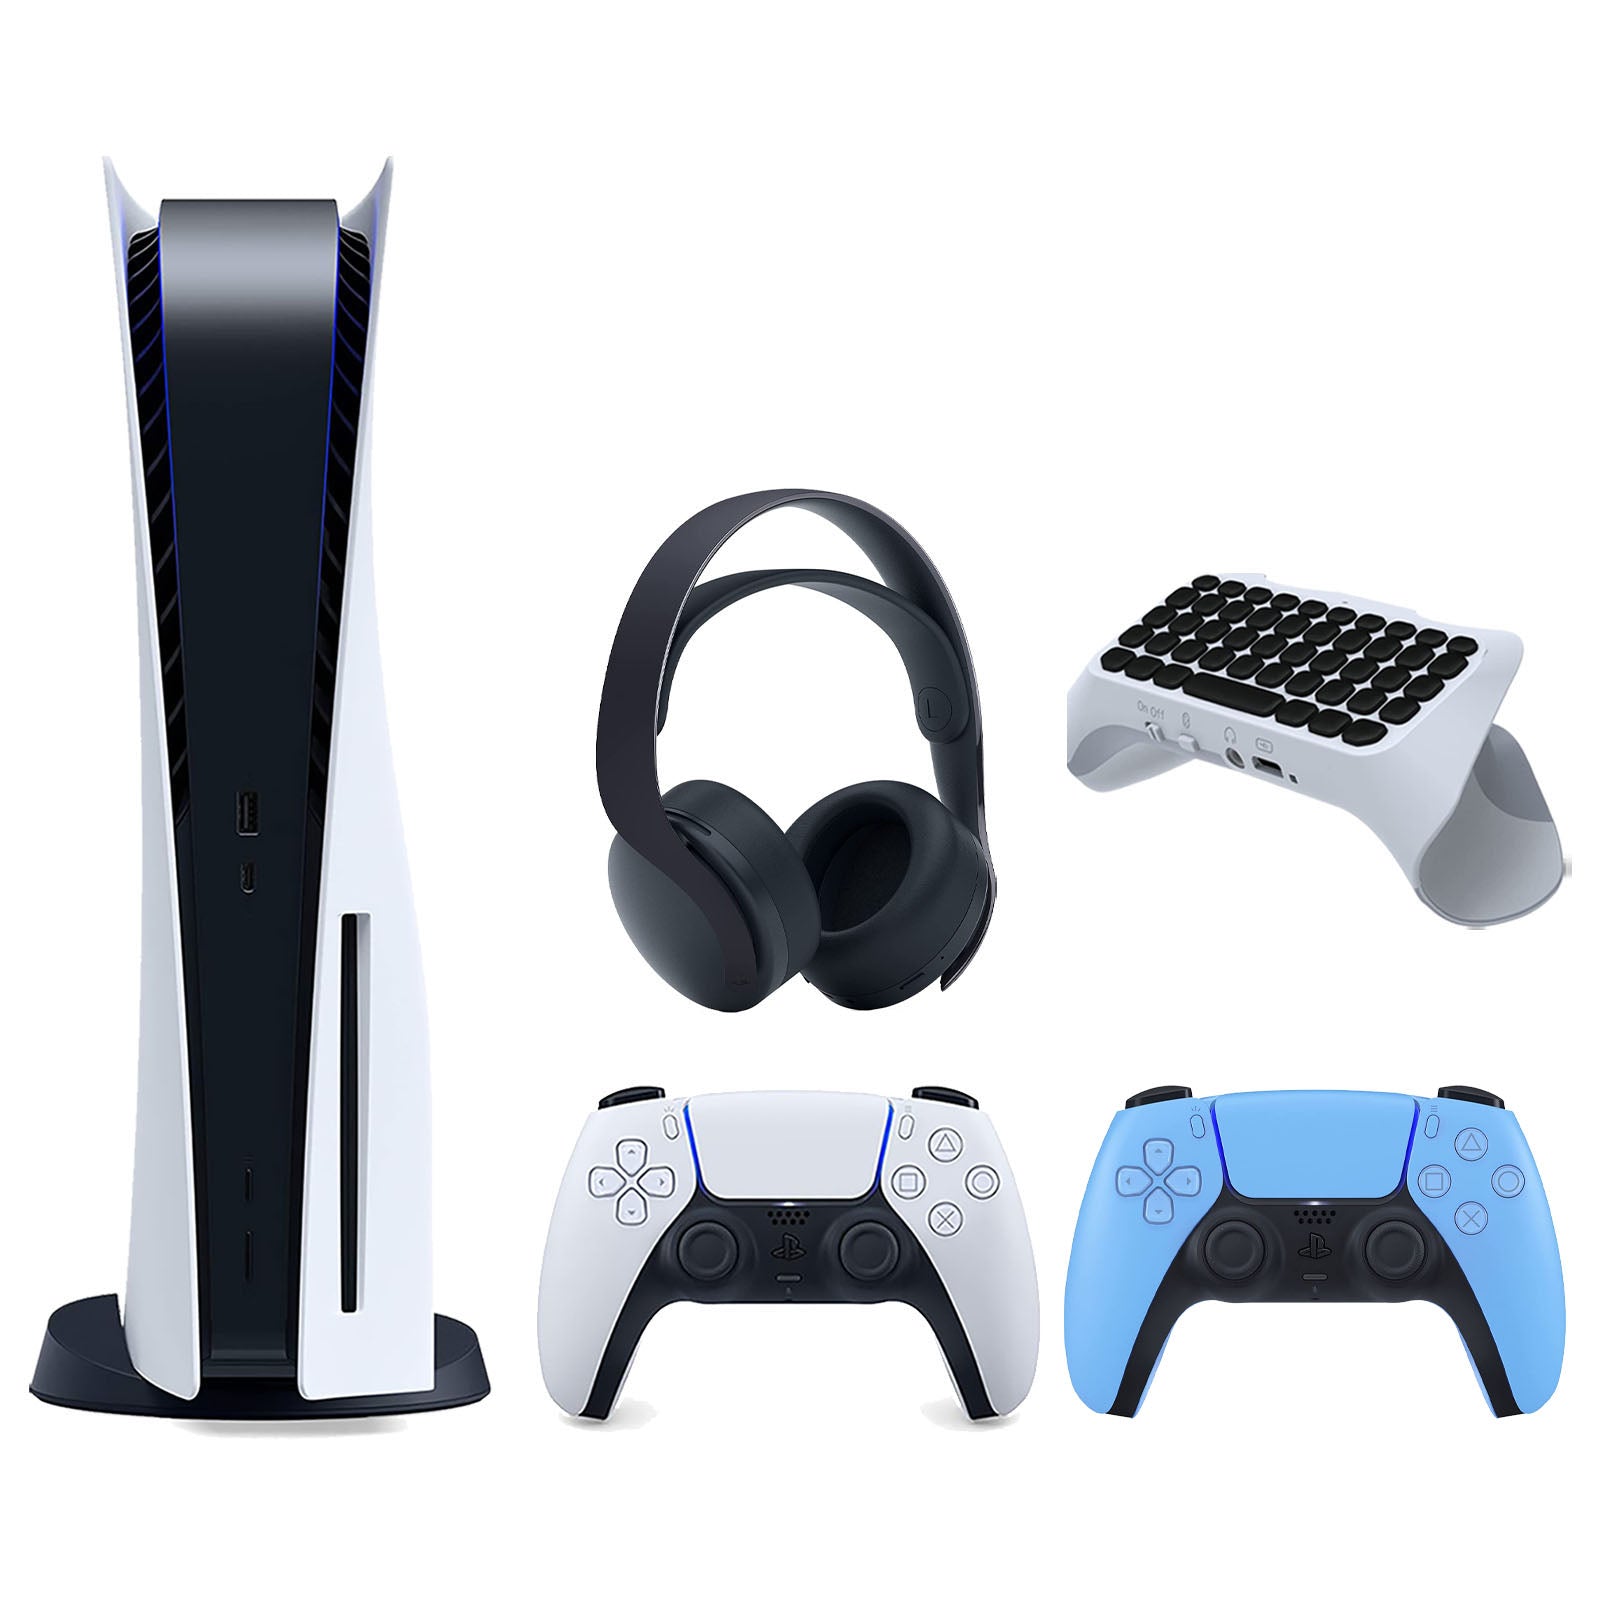 Sony Playstation 5 Disc Version Console with Extra Blue Controller, Black PULSE 3D Headset and Surge QuickType 2.0 Wireless PS5 Controller Keypad Bundle - Pro-Distributing